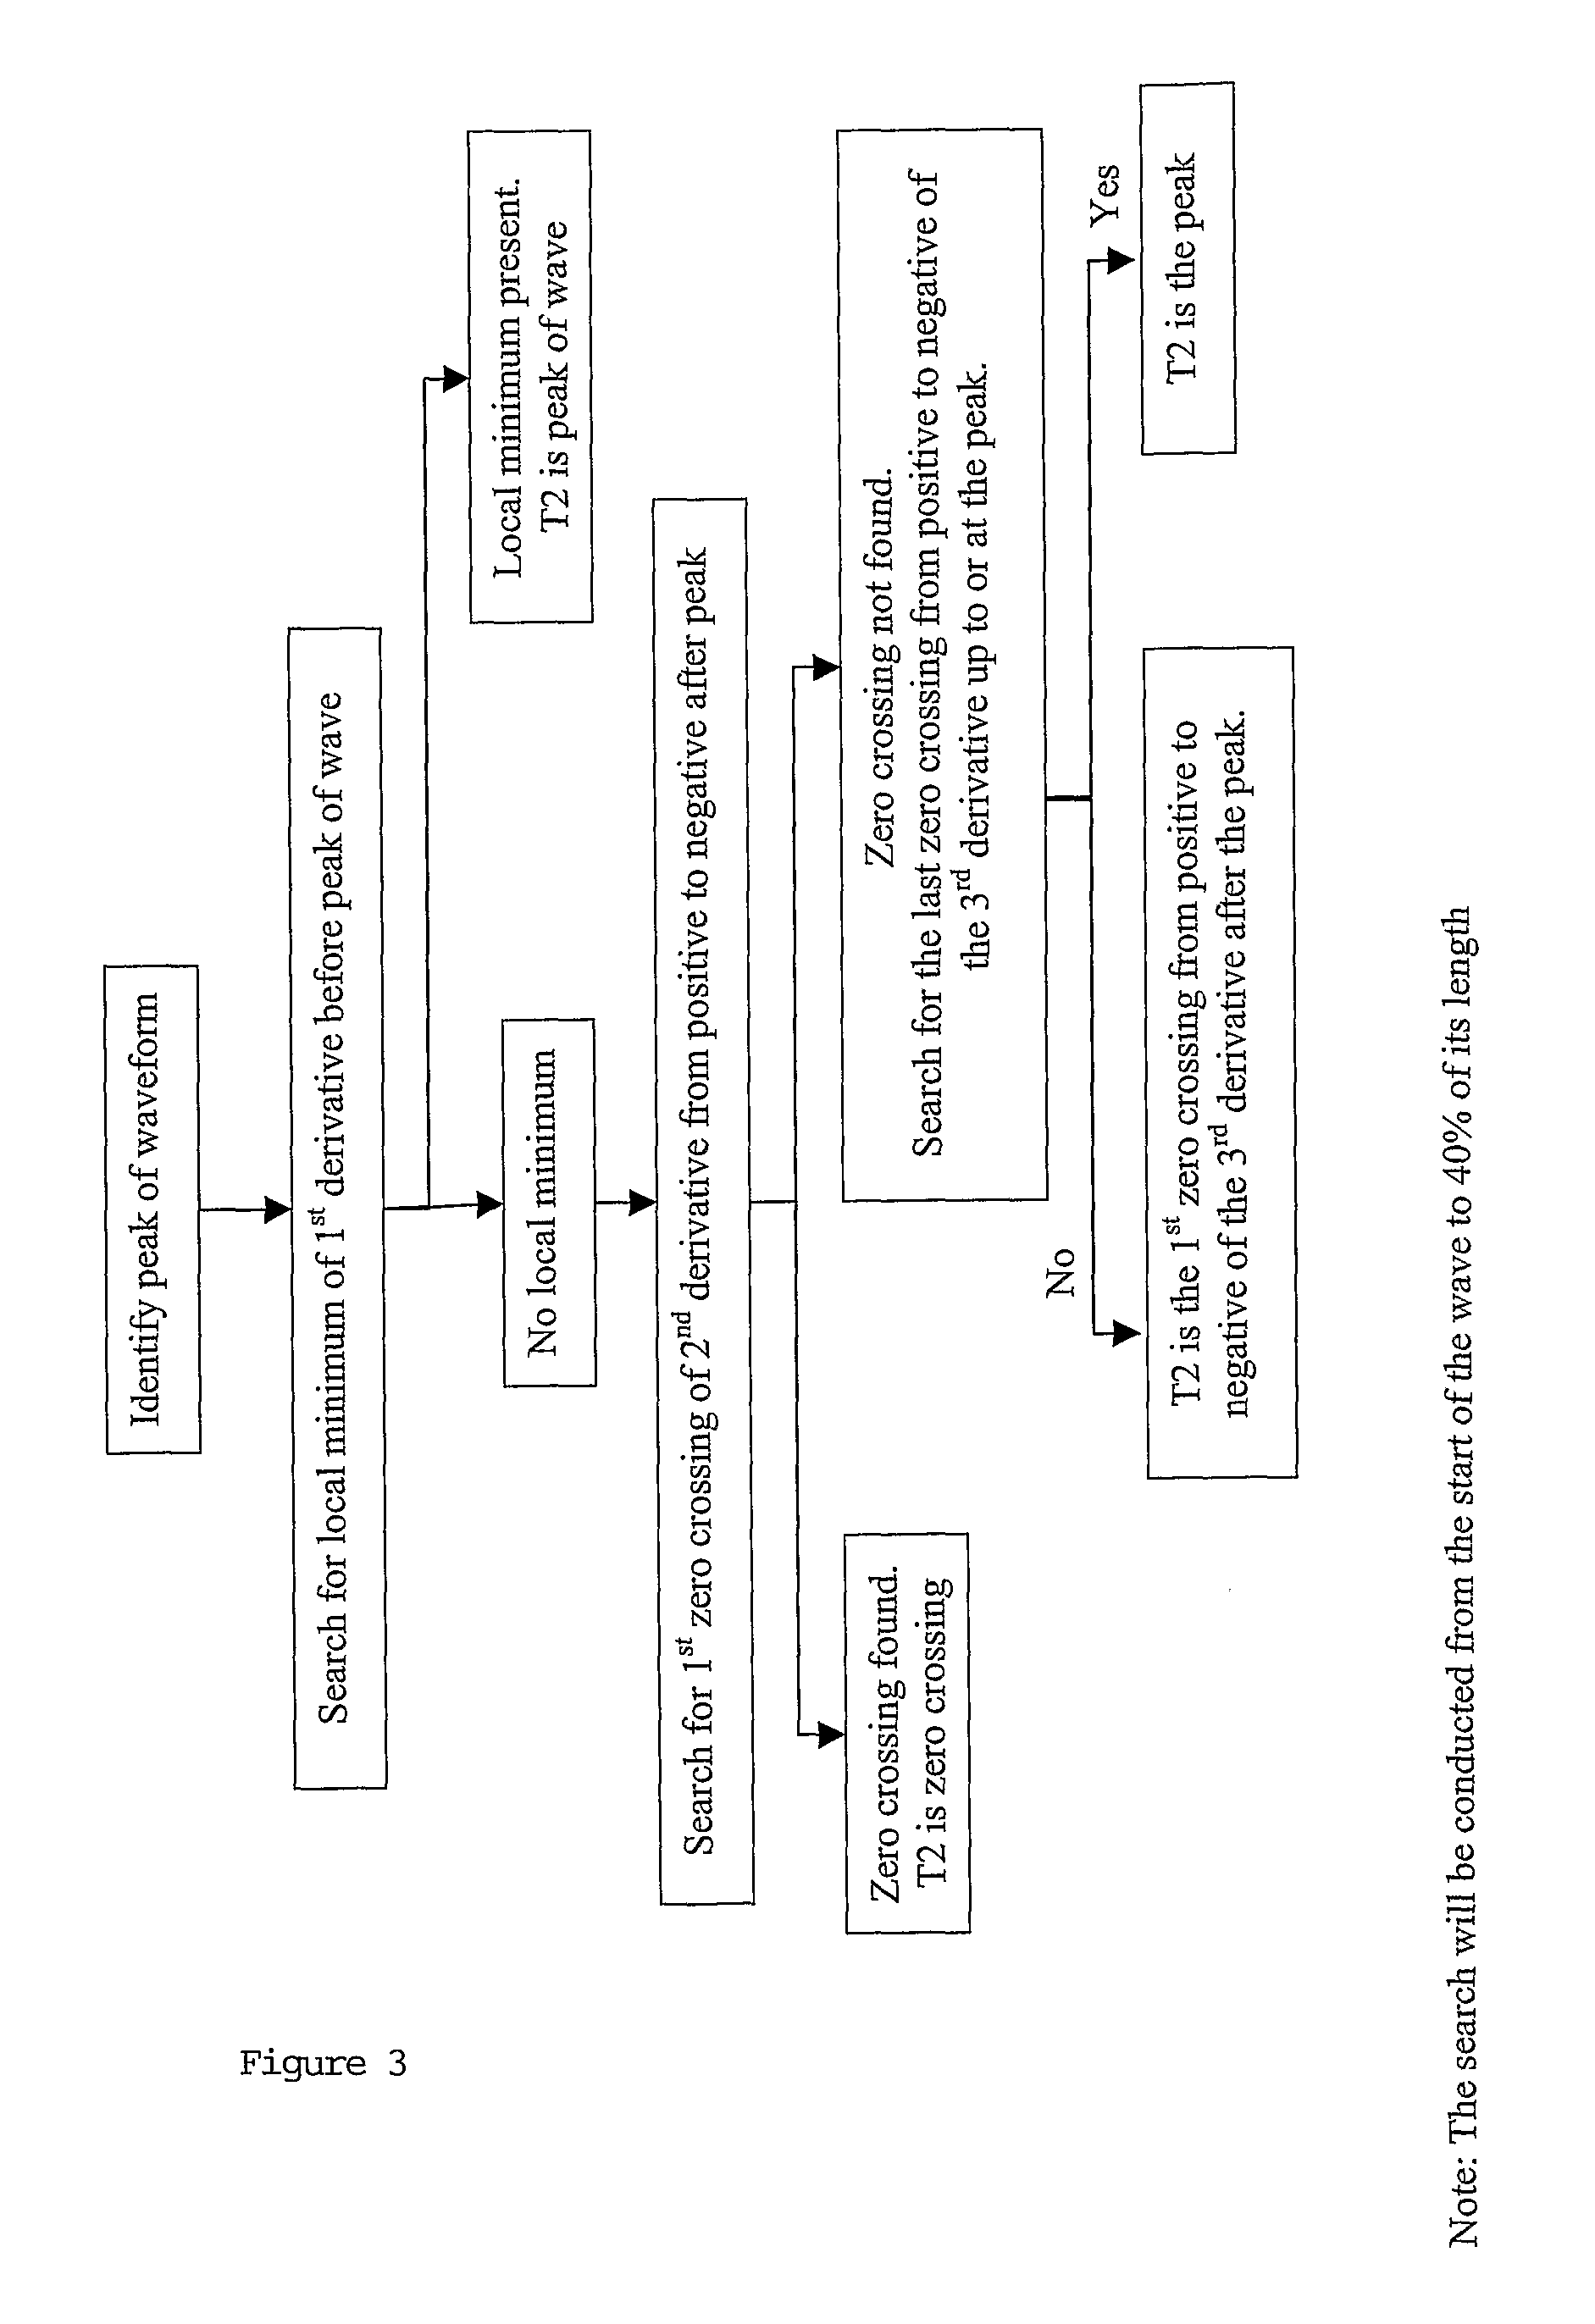 Method and apparatus for determination of central aortic pressure